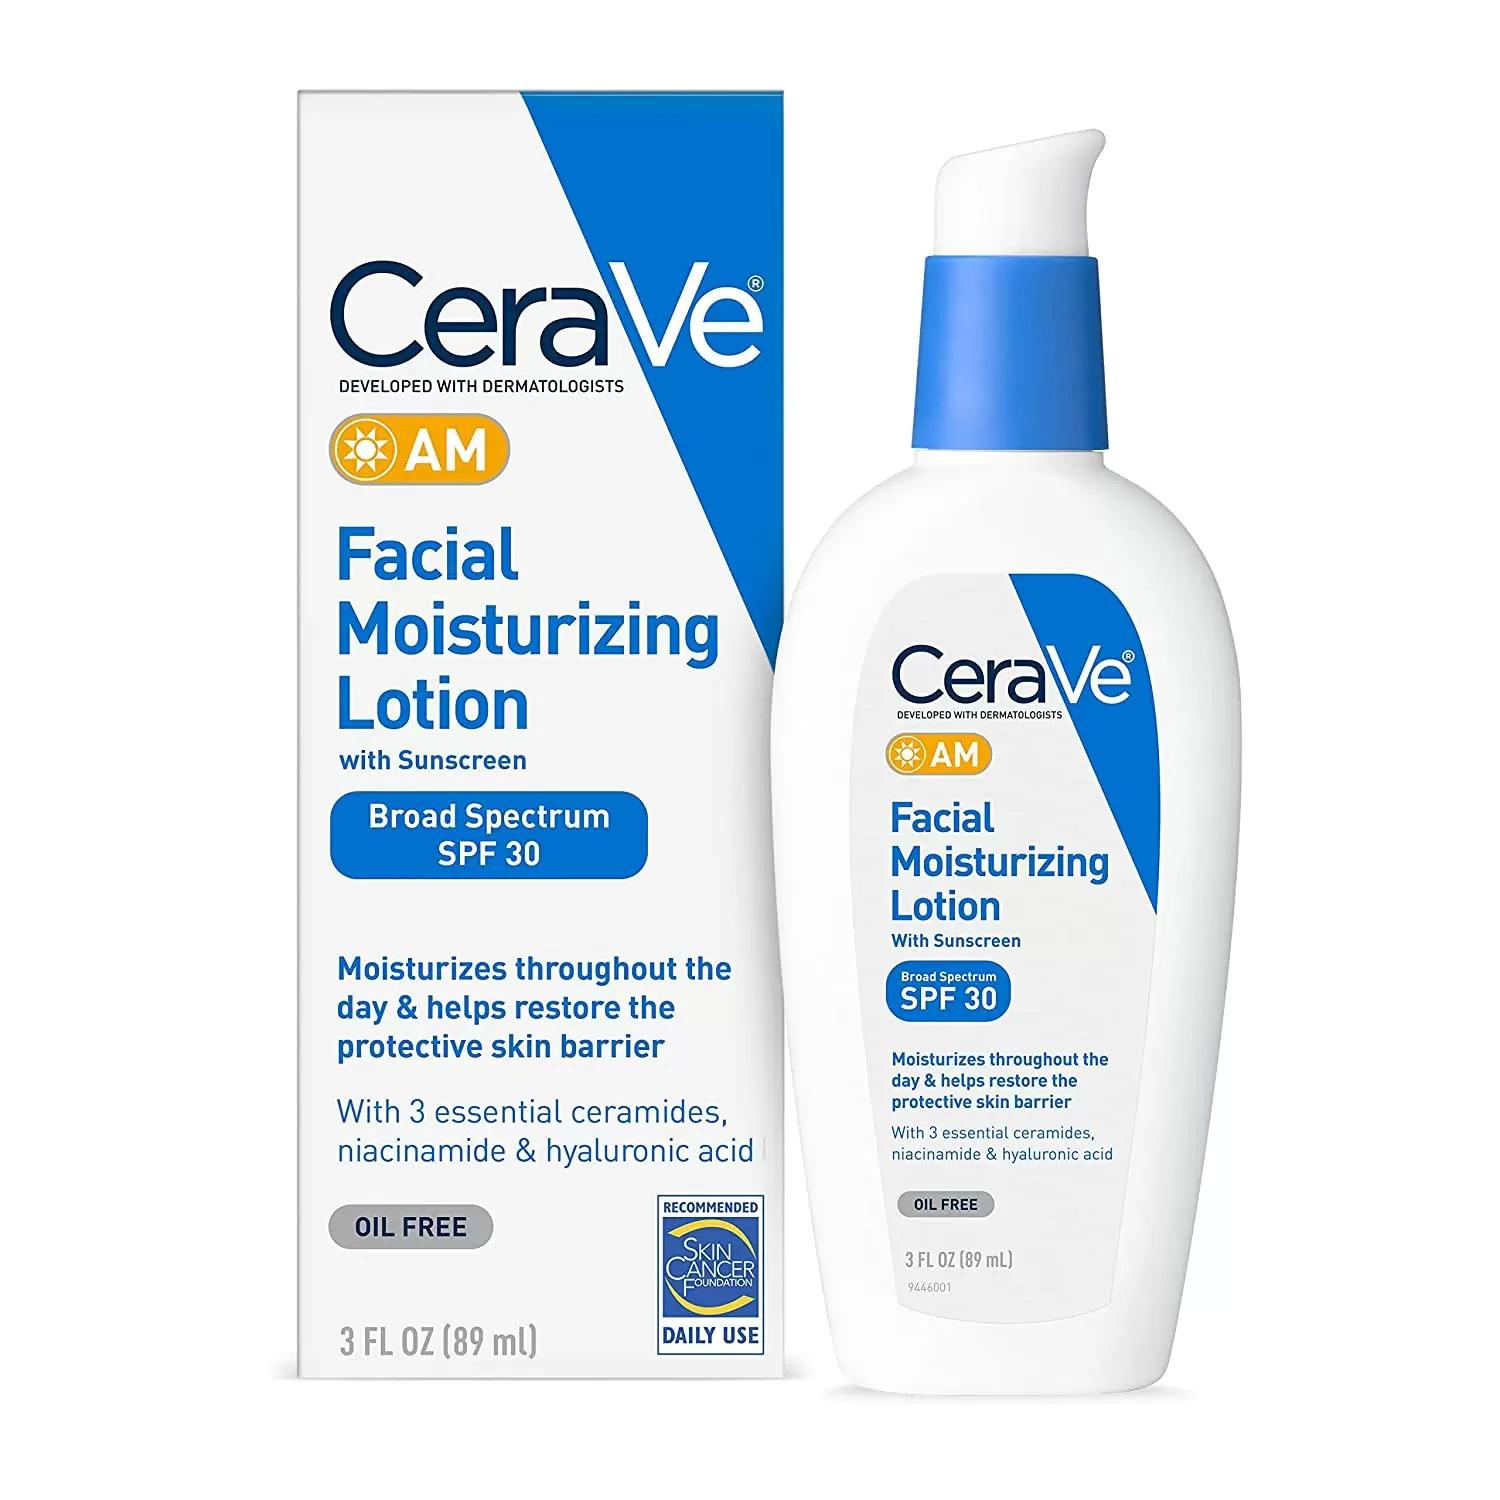 3 CeraVe AM SPF 30 Facial Moisturizing Lotion for $23.10 Shipped